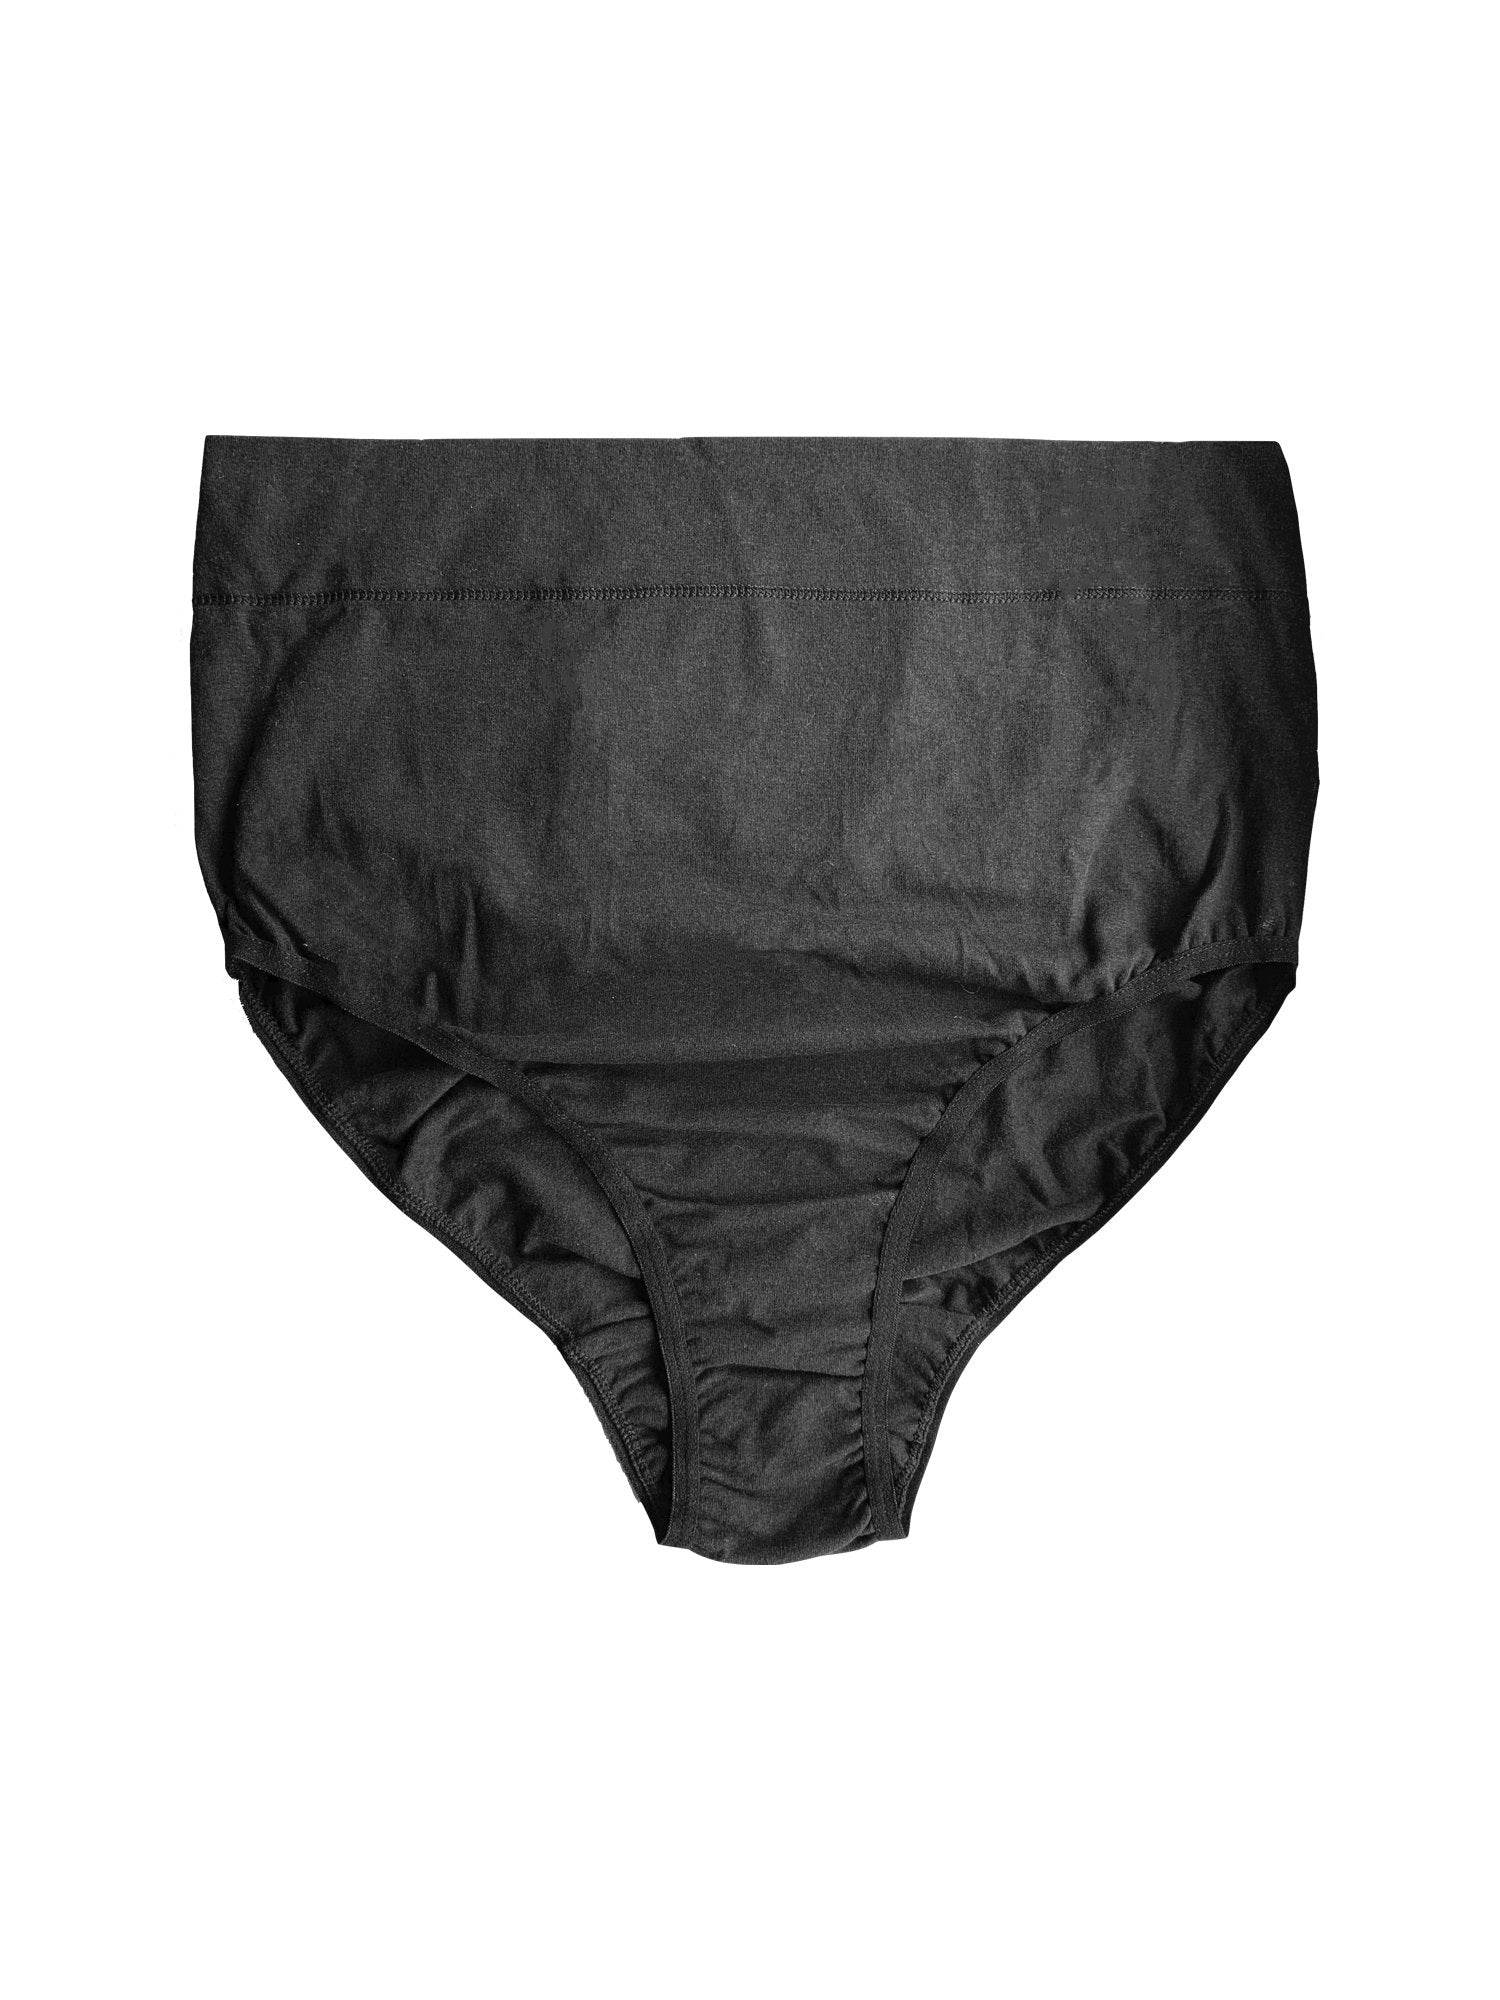 Inner Sense Organic Cotton Antimicrobial Maternity Panty - Pack of 2 Cotton, featured, full back coverage, Maternity, Maternity Panty, organic, Panties - bare essentials